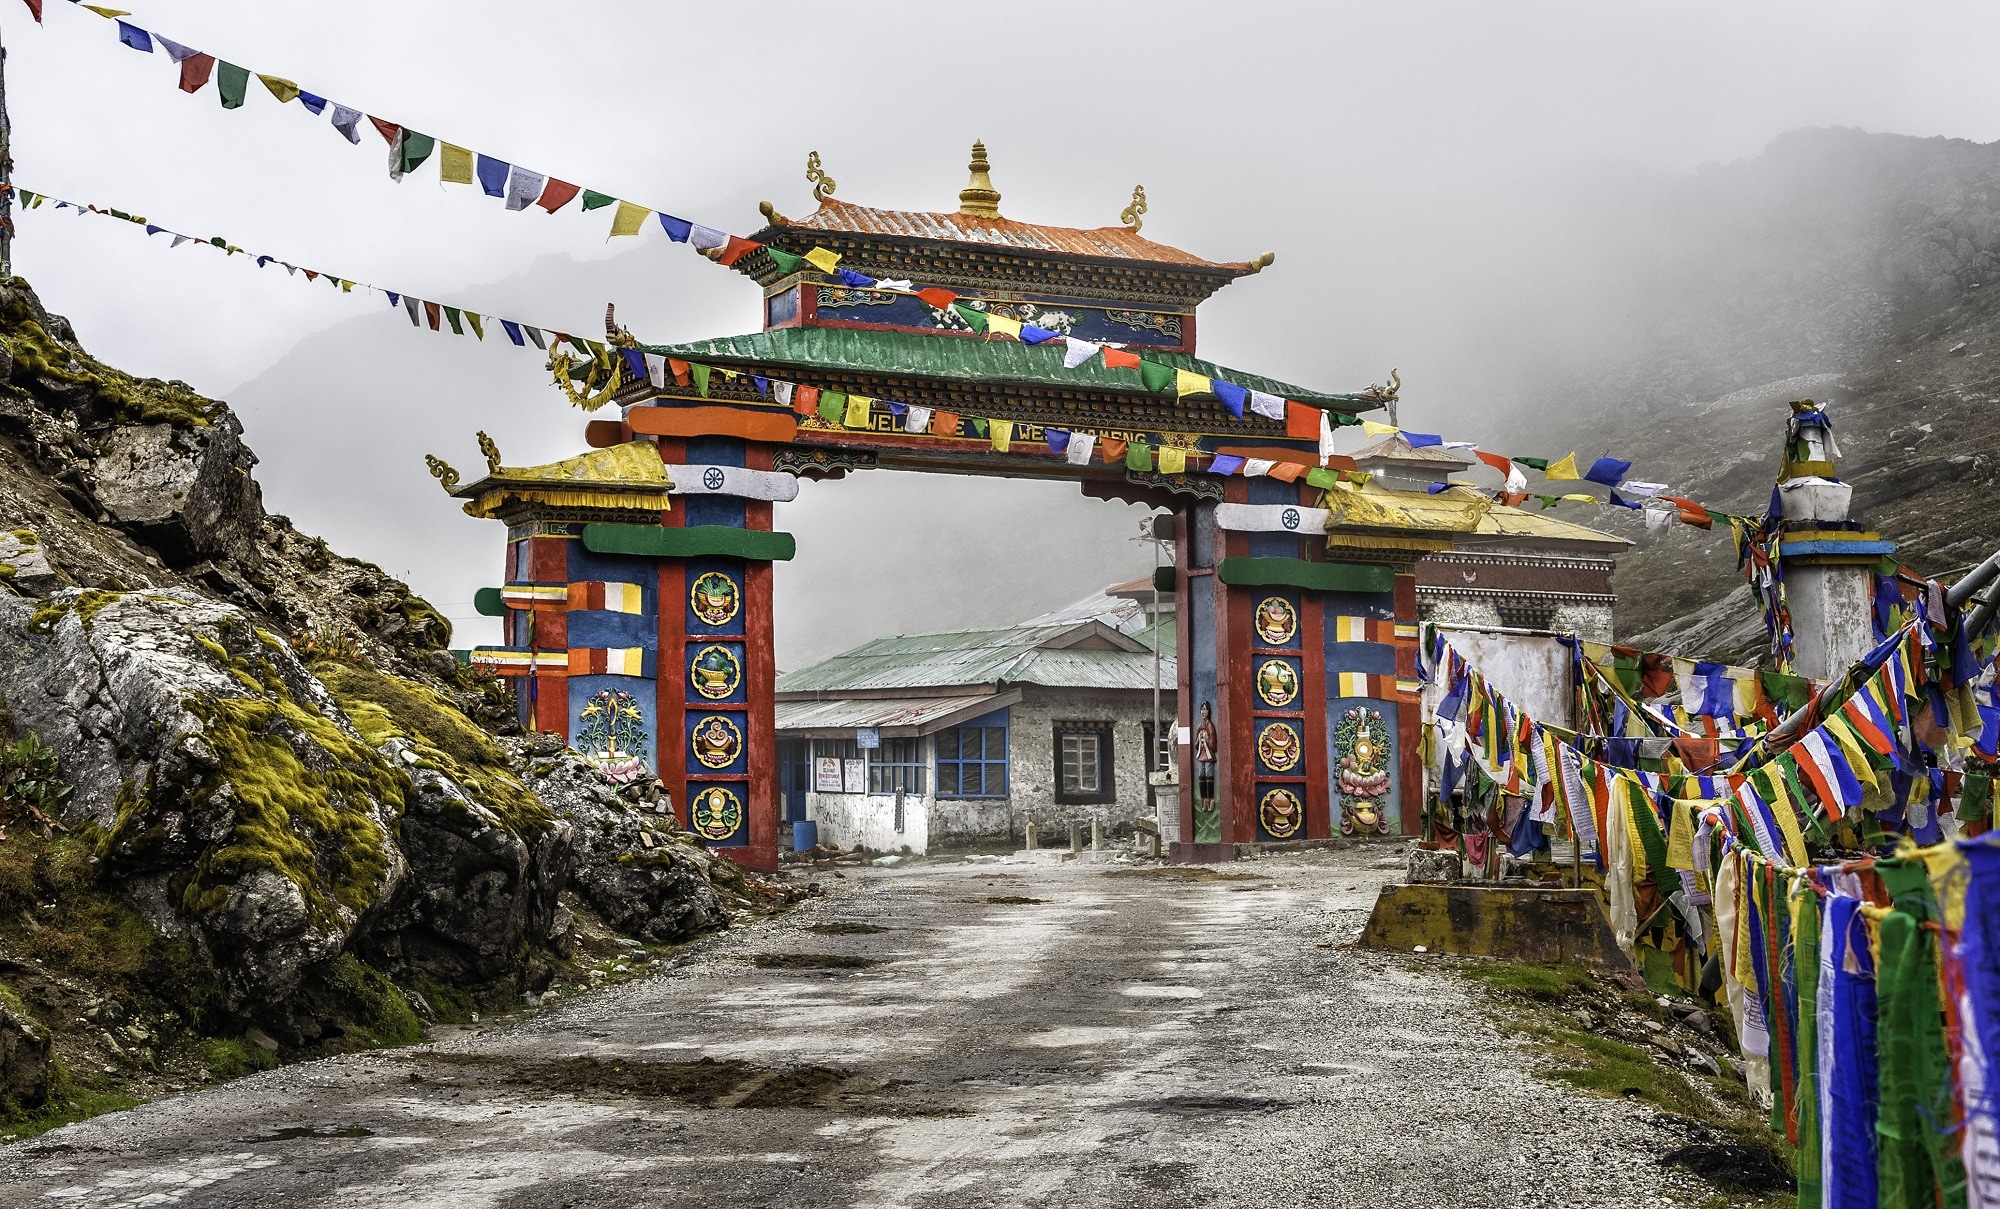 If Peace was a destination, it would be Tawang!